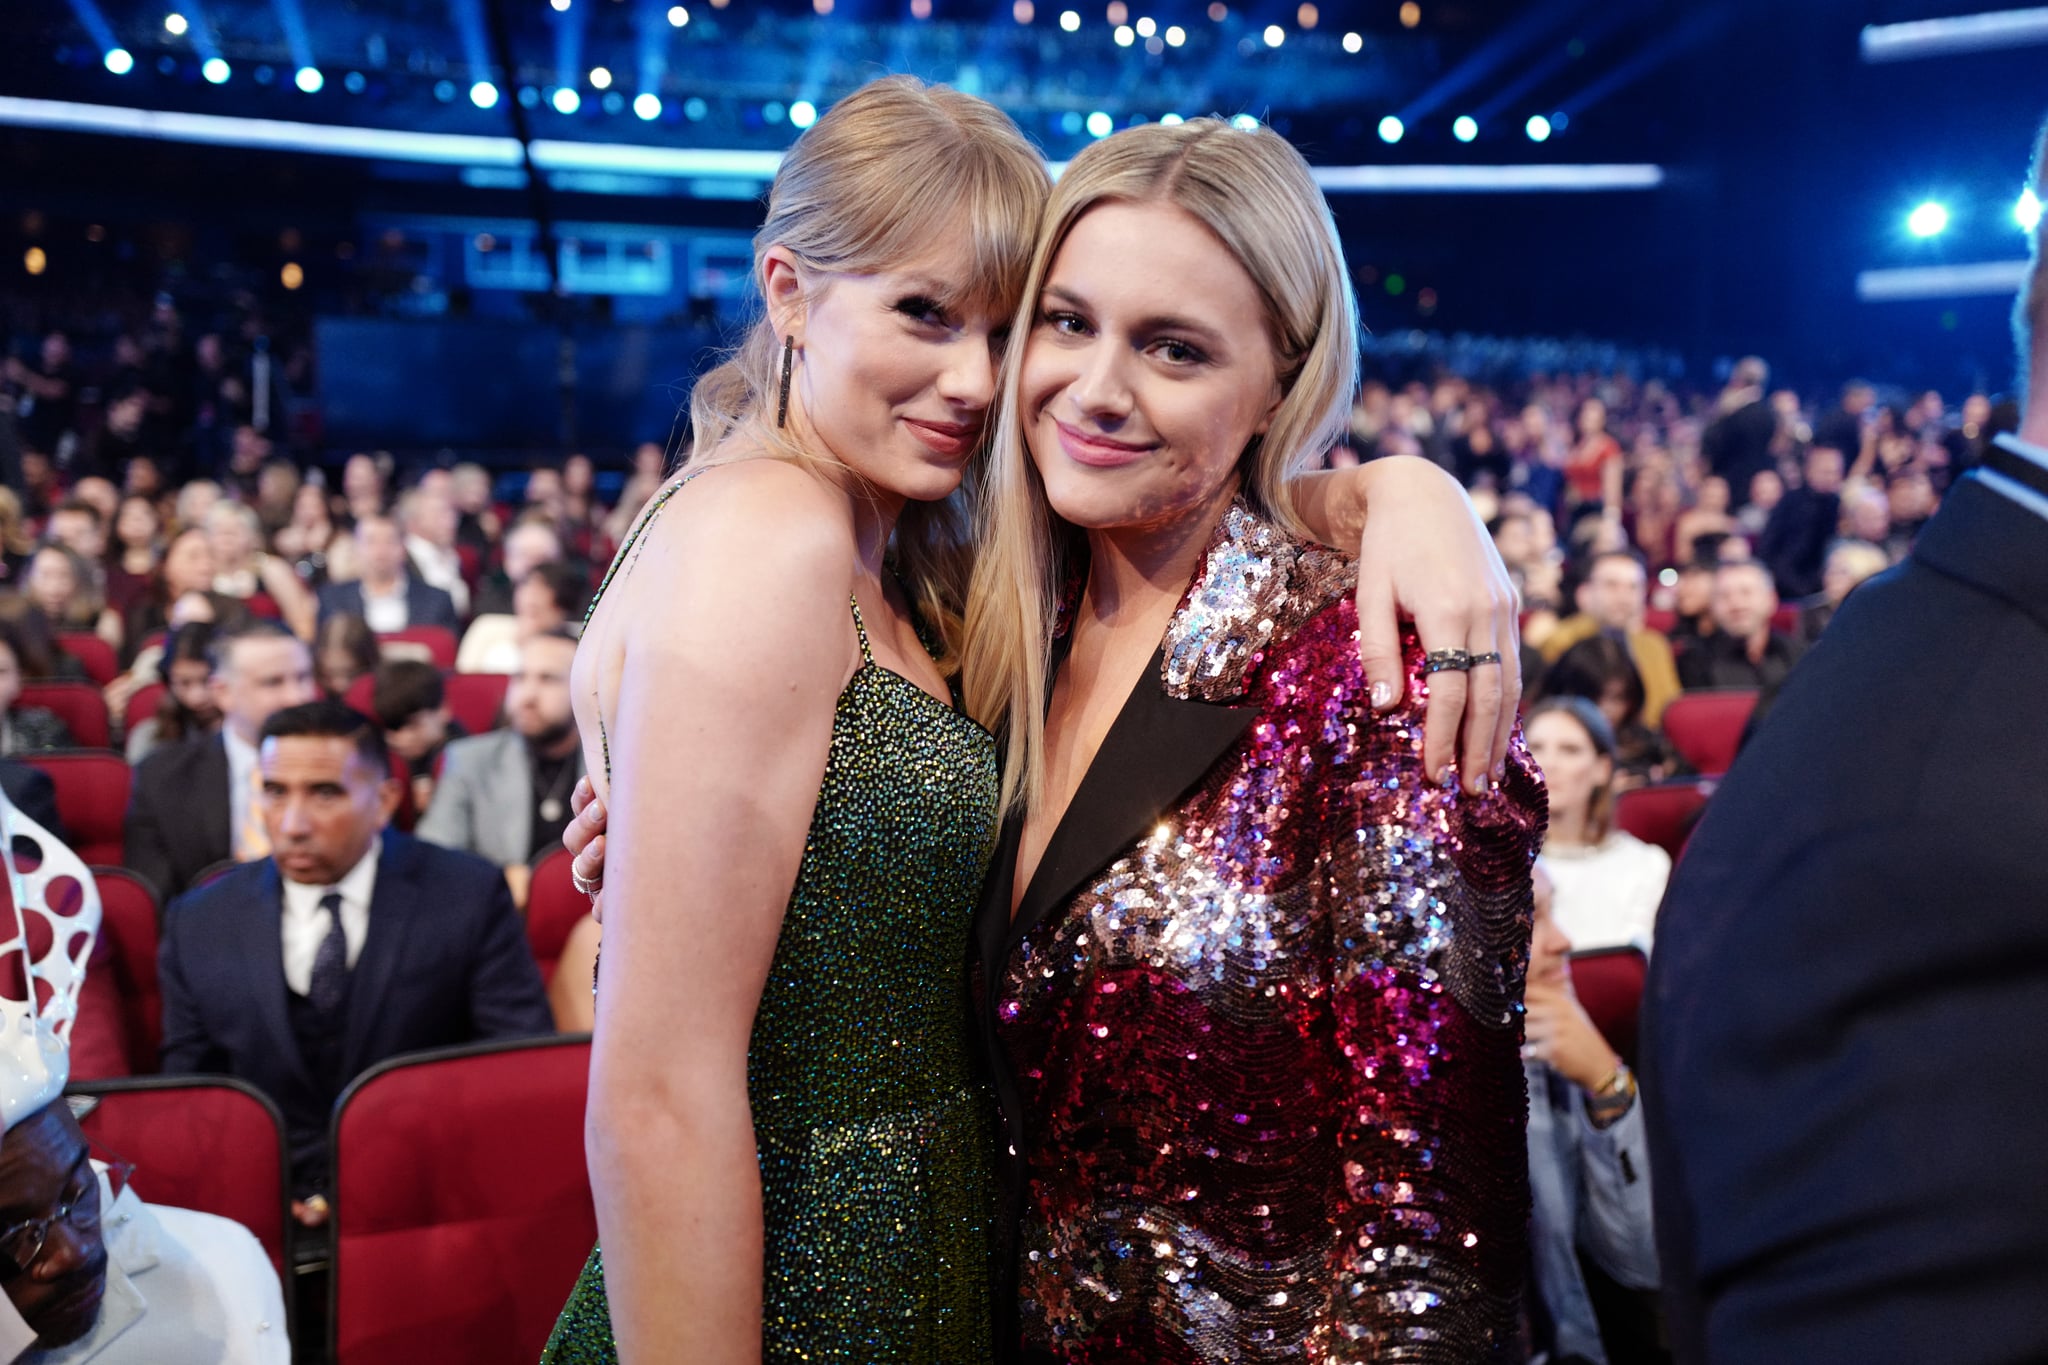 LOS ANGELES, CALIFORNIA - NOVEMBER 24: (L-R) Taylor Swift and Kelsea Ballerini attend the 2019 American Music Awards at Microsoft Theater on November 24, 2019 in Los Angeles, California. (Photo by John Shearer/AMA2019/Getty Images for dcp)